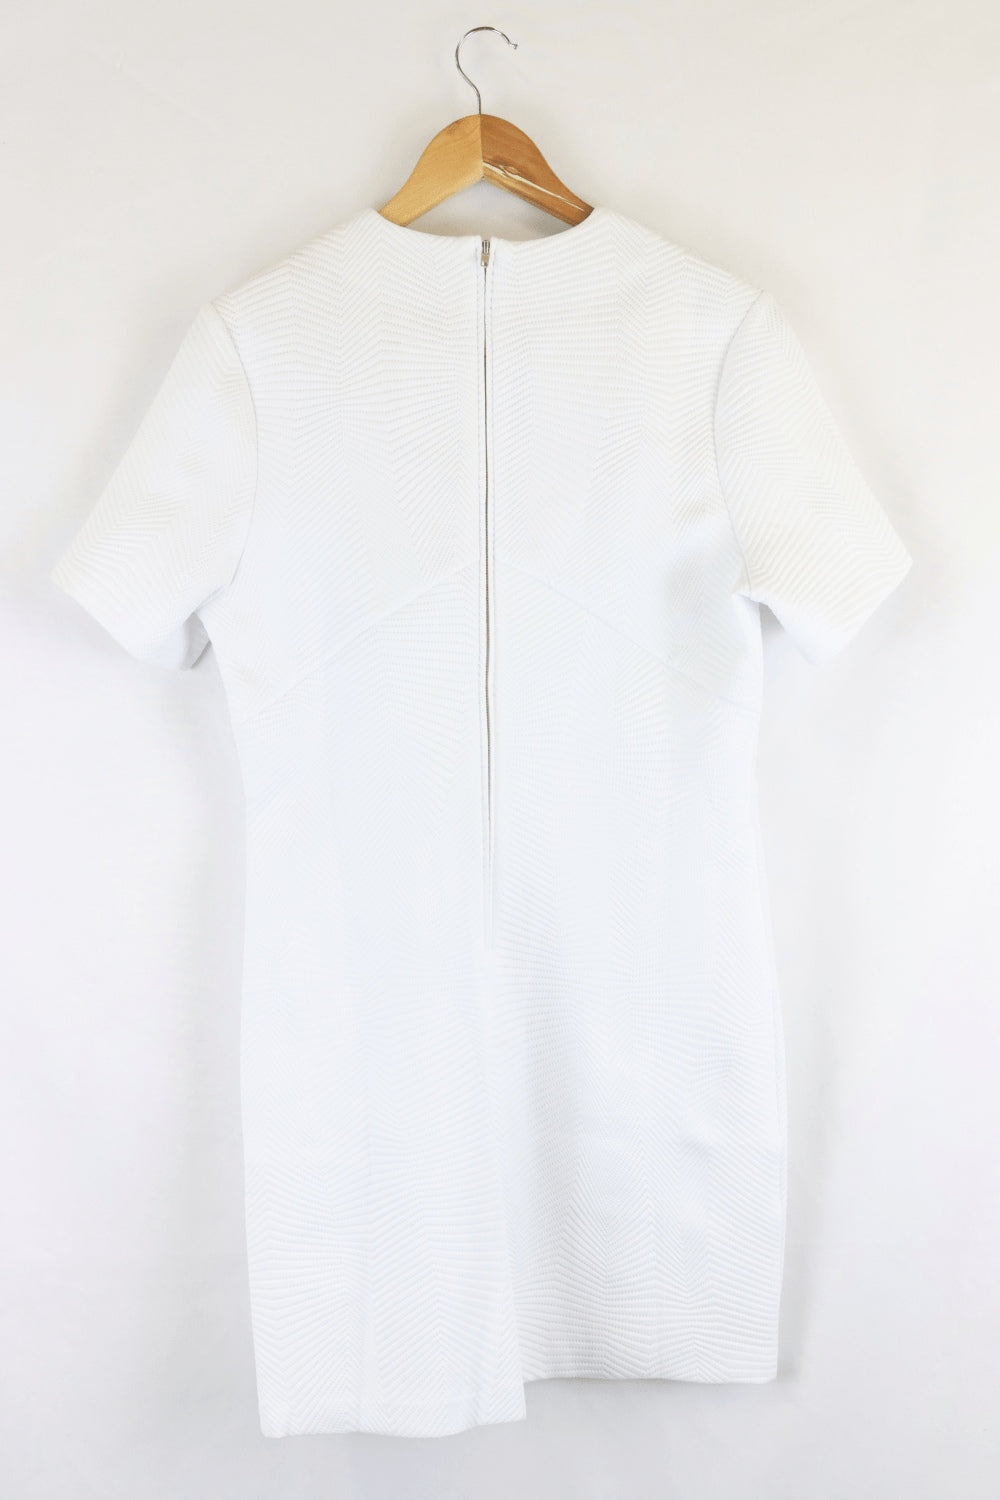 Muther Of All Things White Dress 12